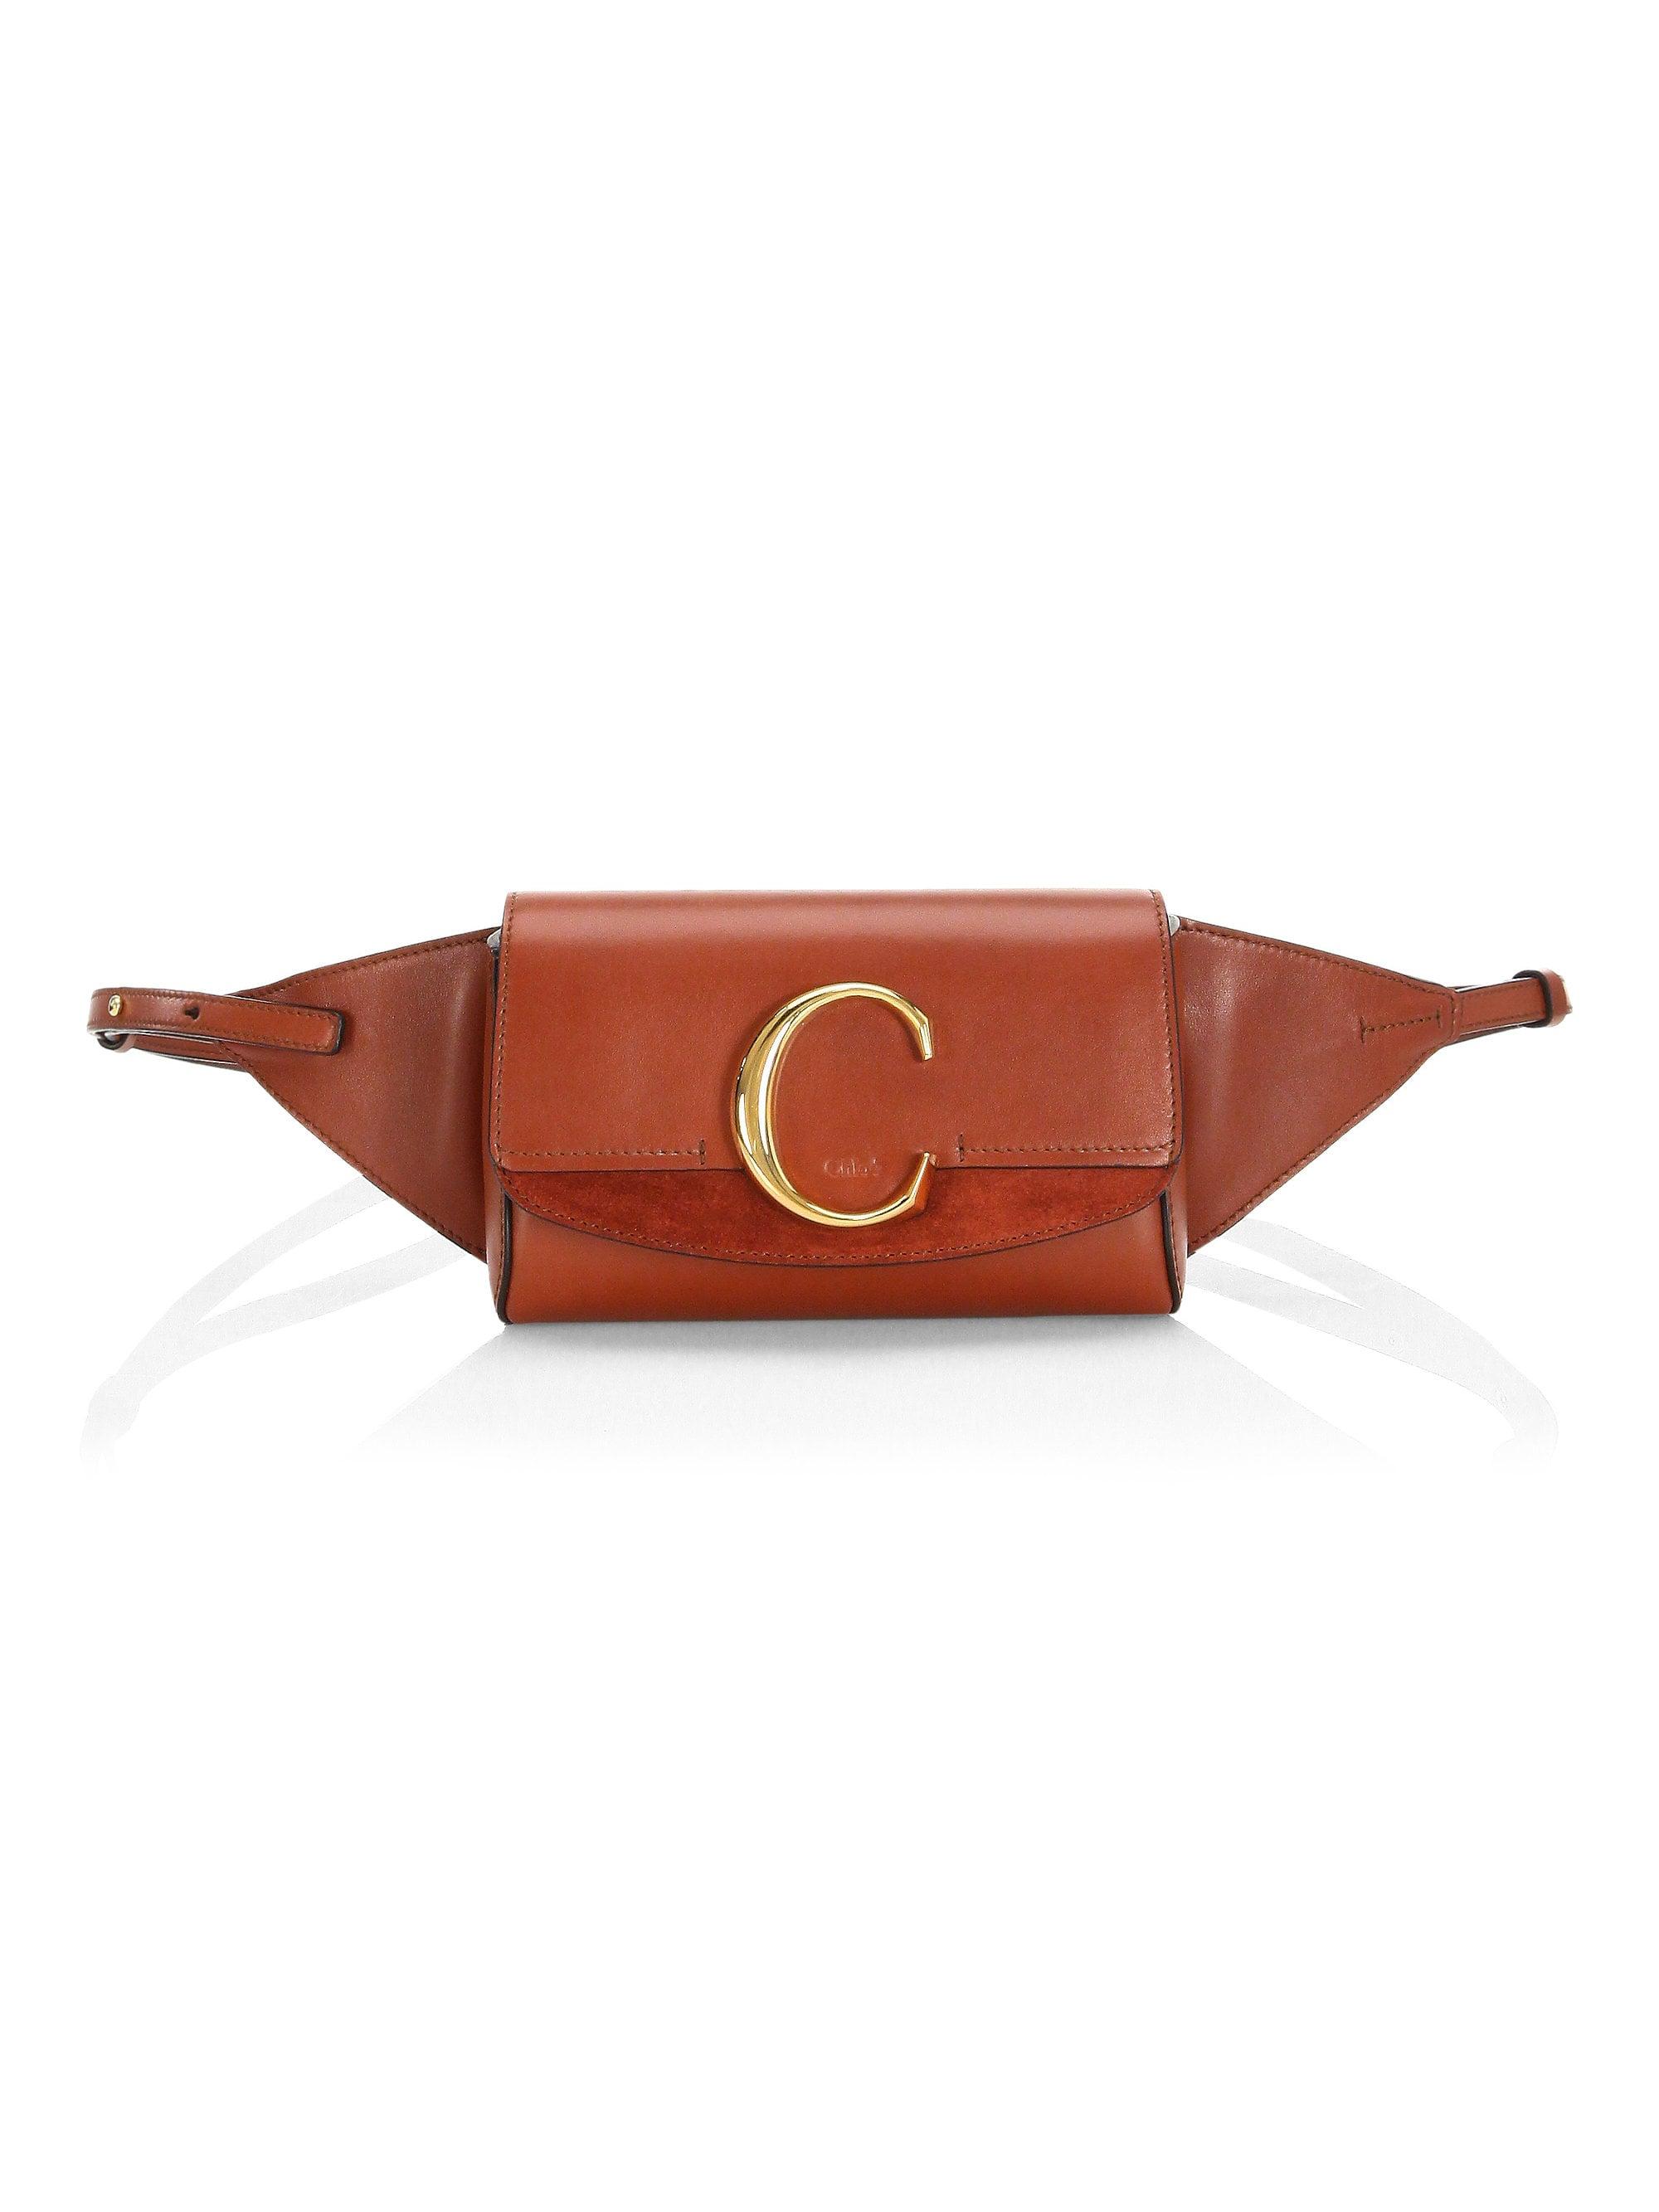 Chloé C Suede-trimmed Leather Belt Bag in Brown - Lyst